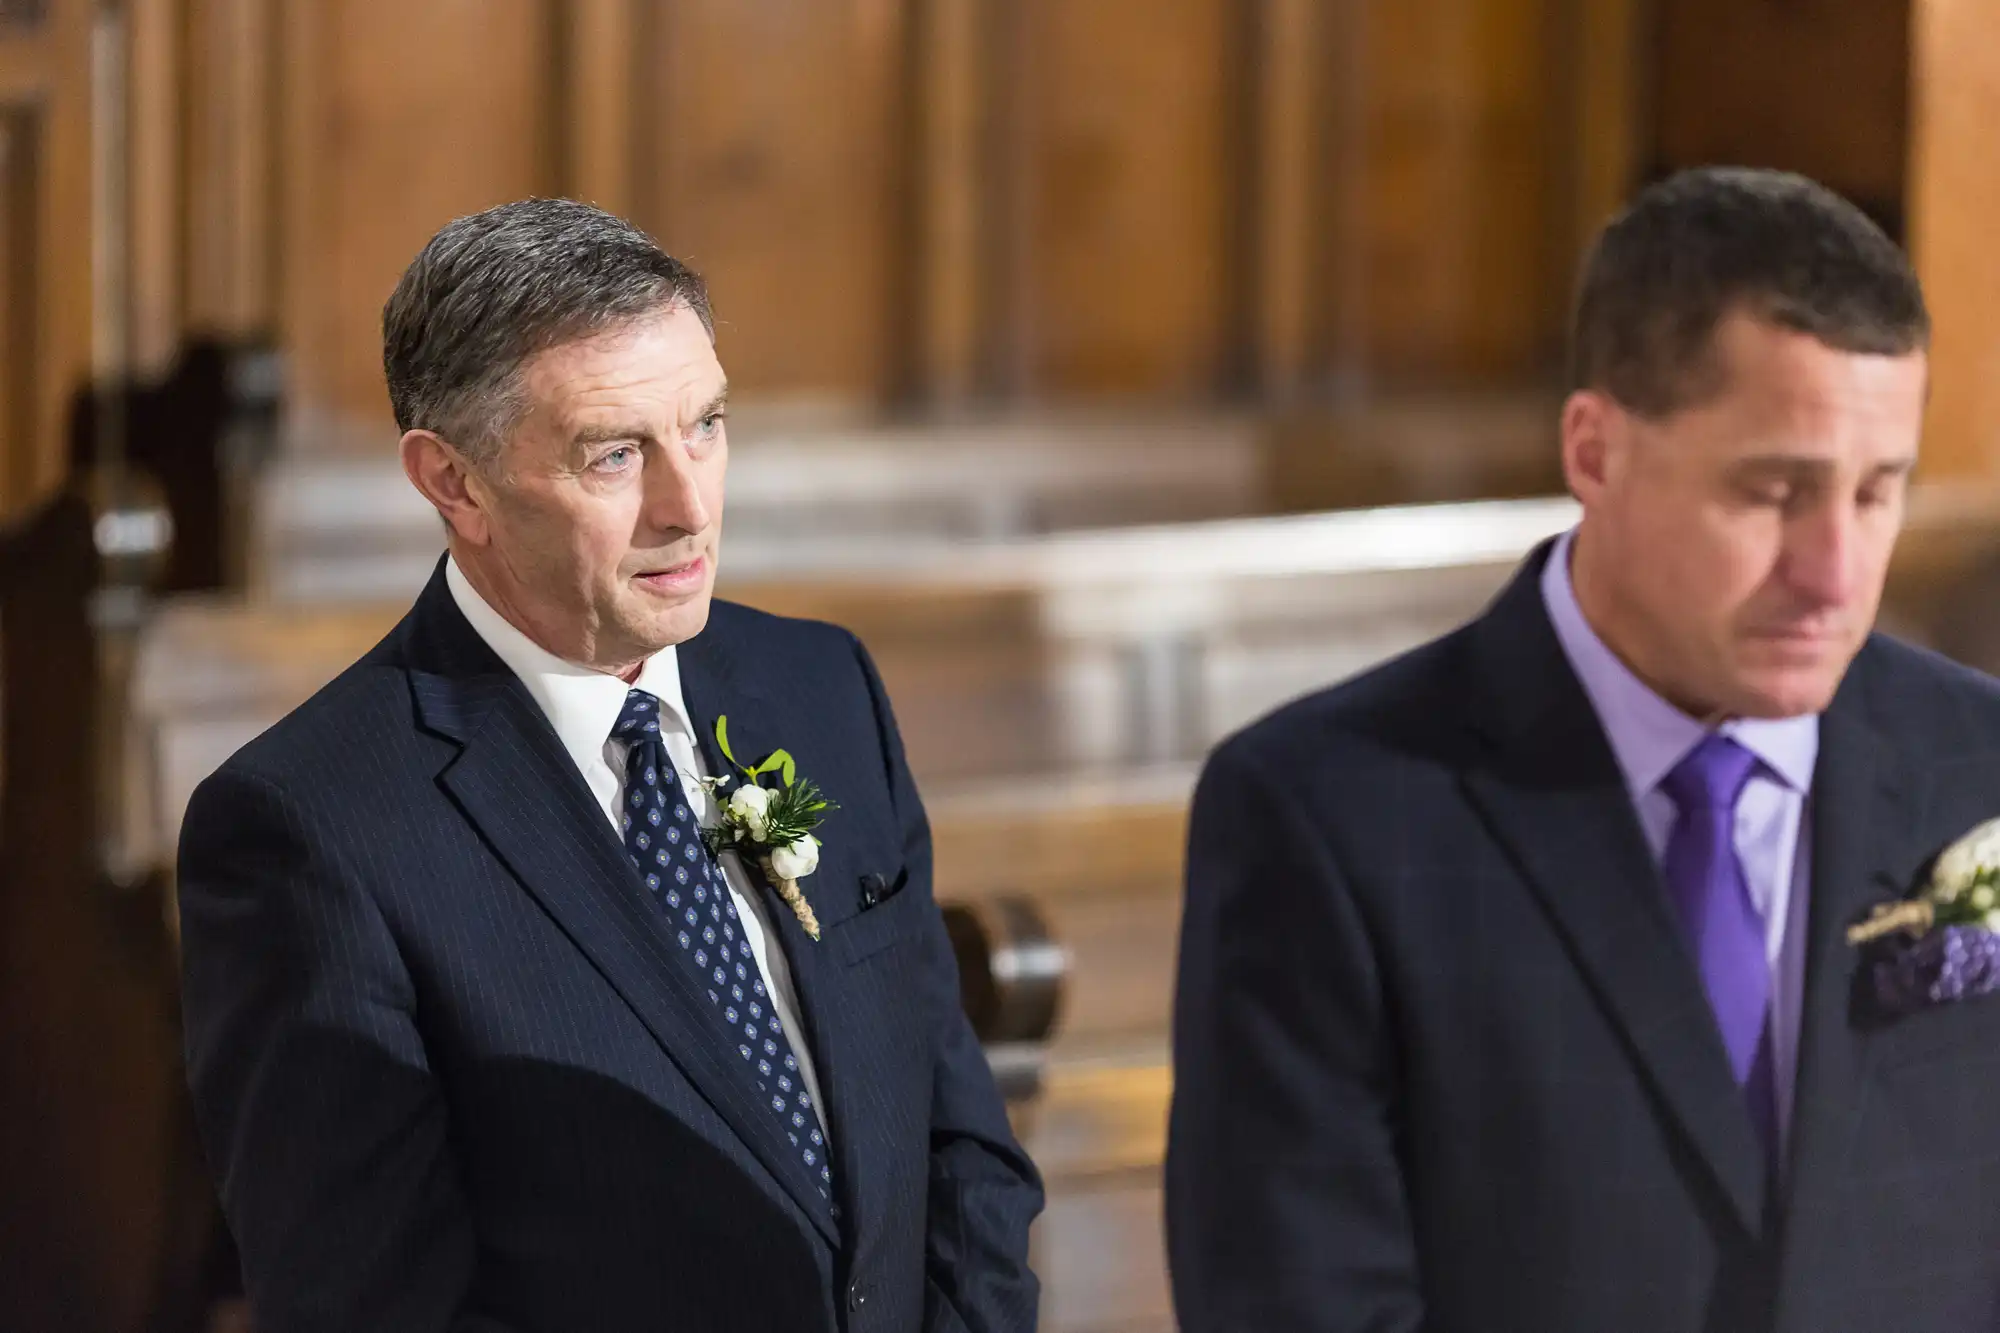 Two men in suits with boutonnieres stand solemnly inside a church, one looking intently while the other looks down.